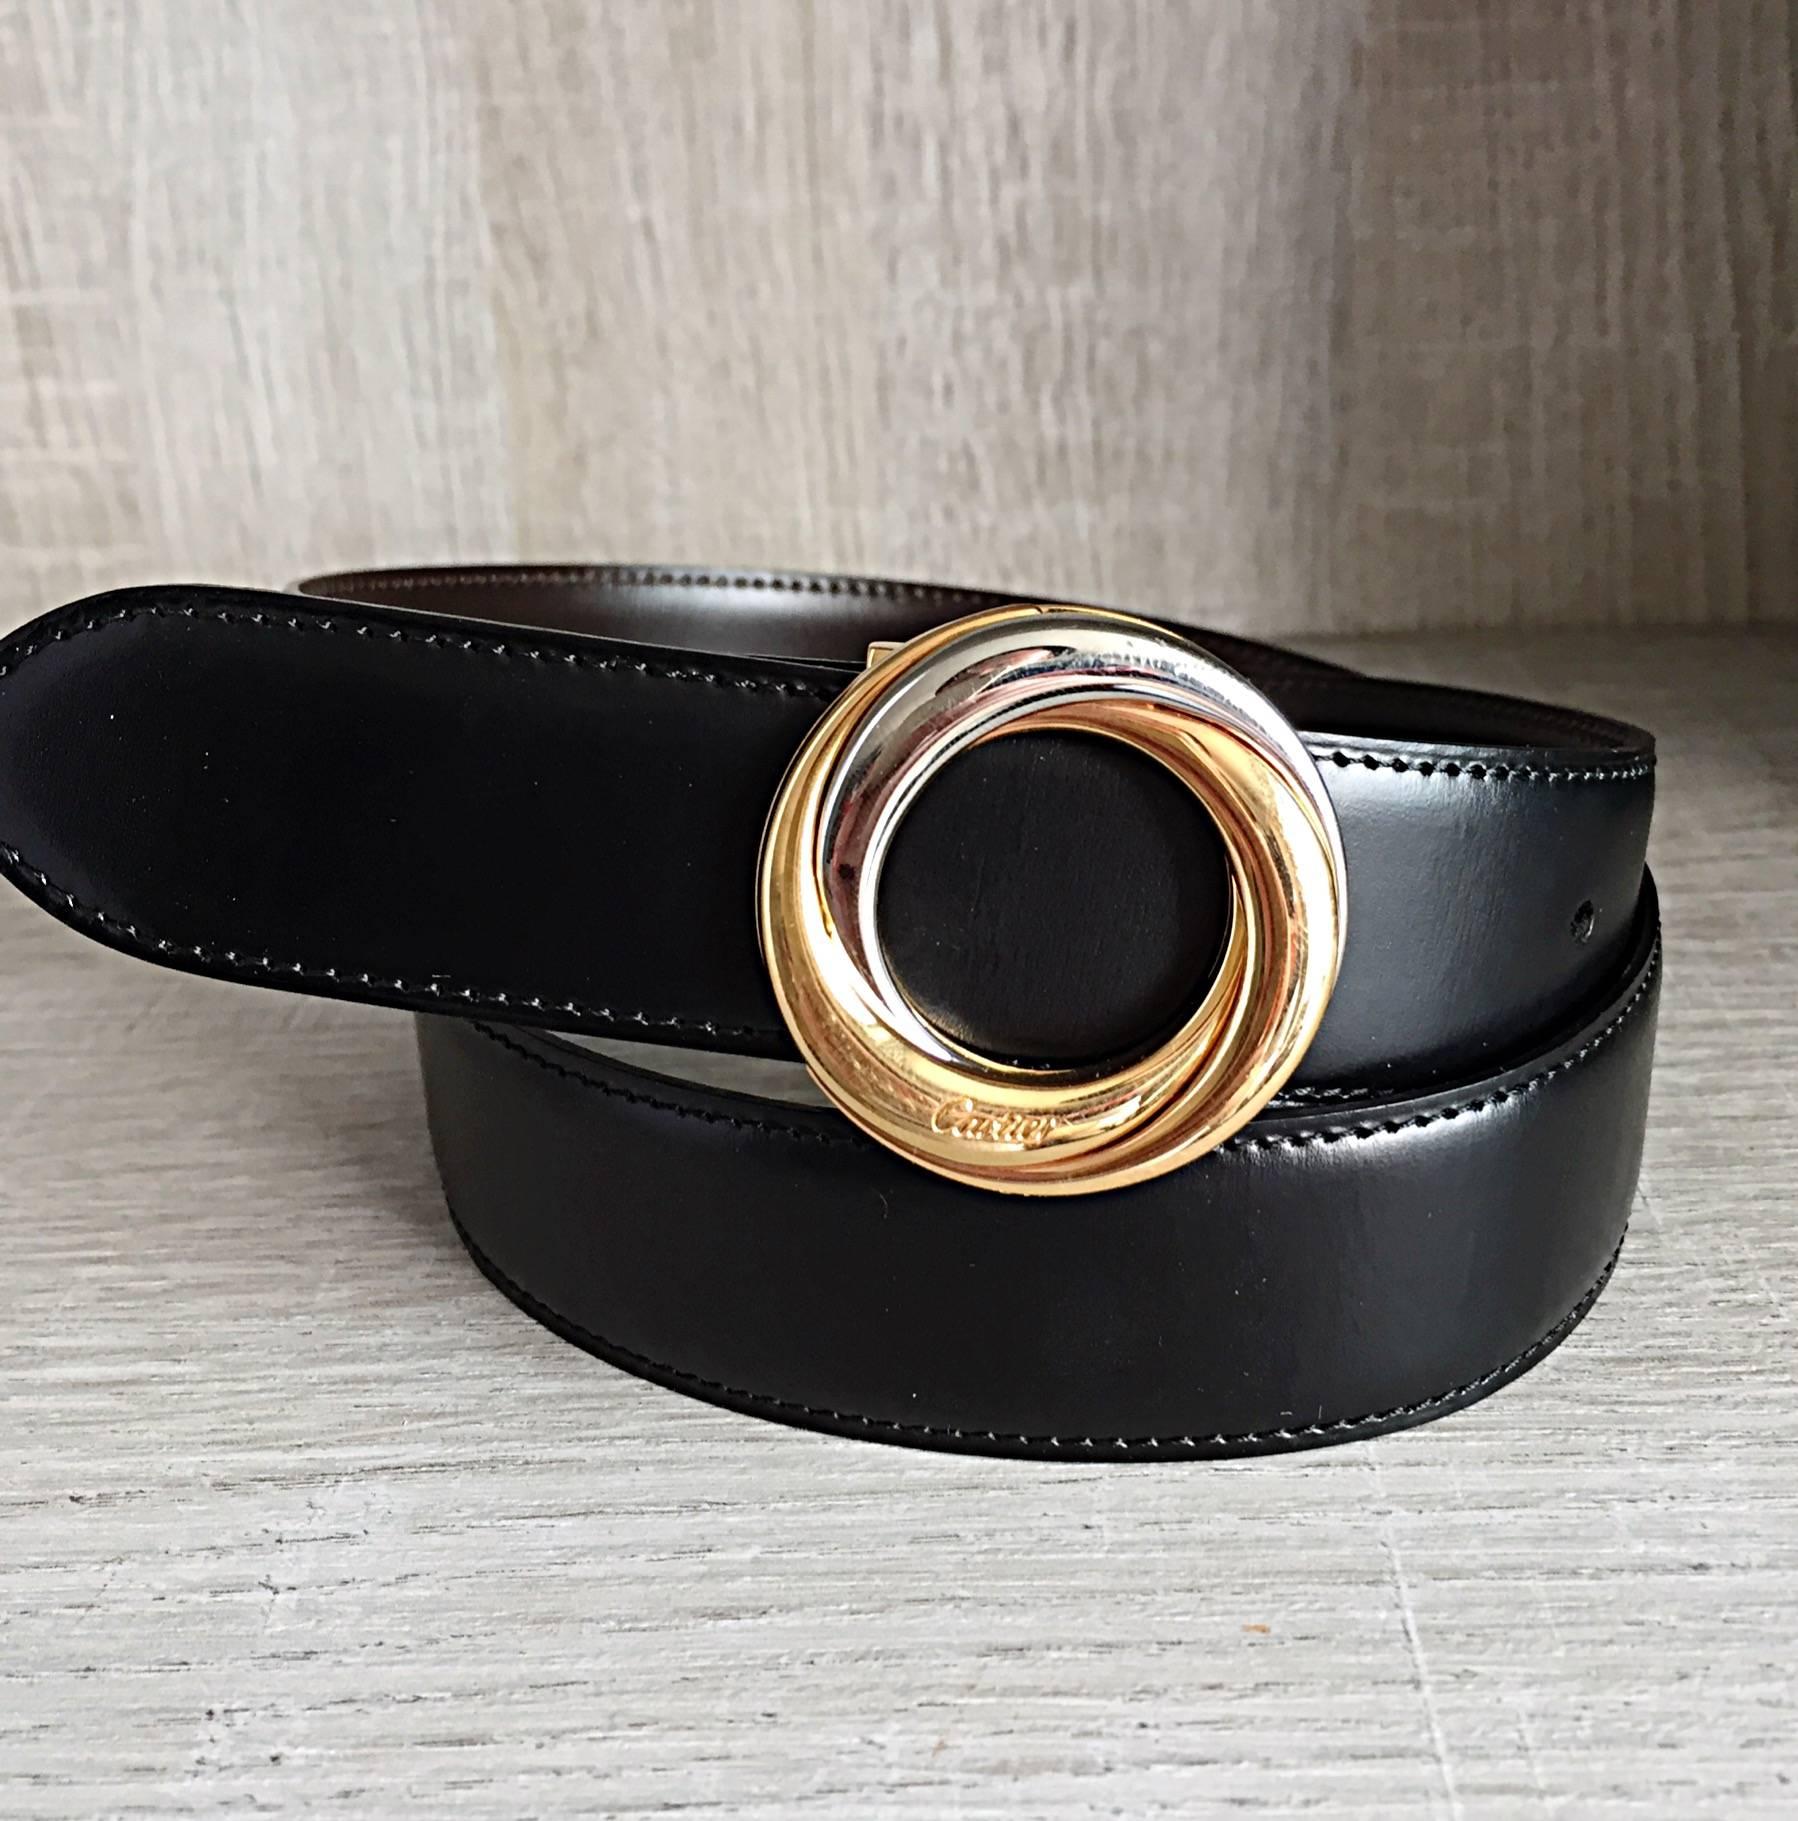 New Cartier Unisex Reversible Belt Brown + Black Two - Tone Gold & Silver Buckle 6